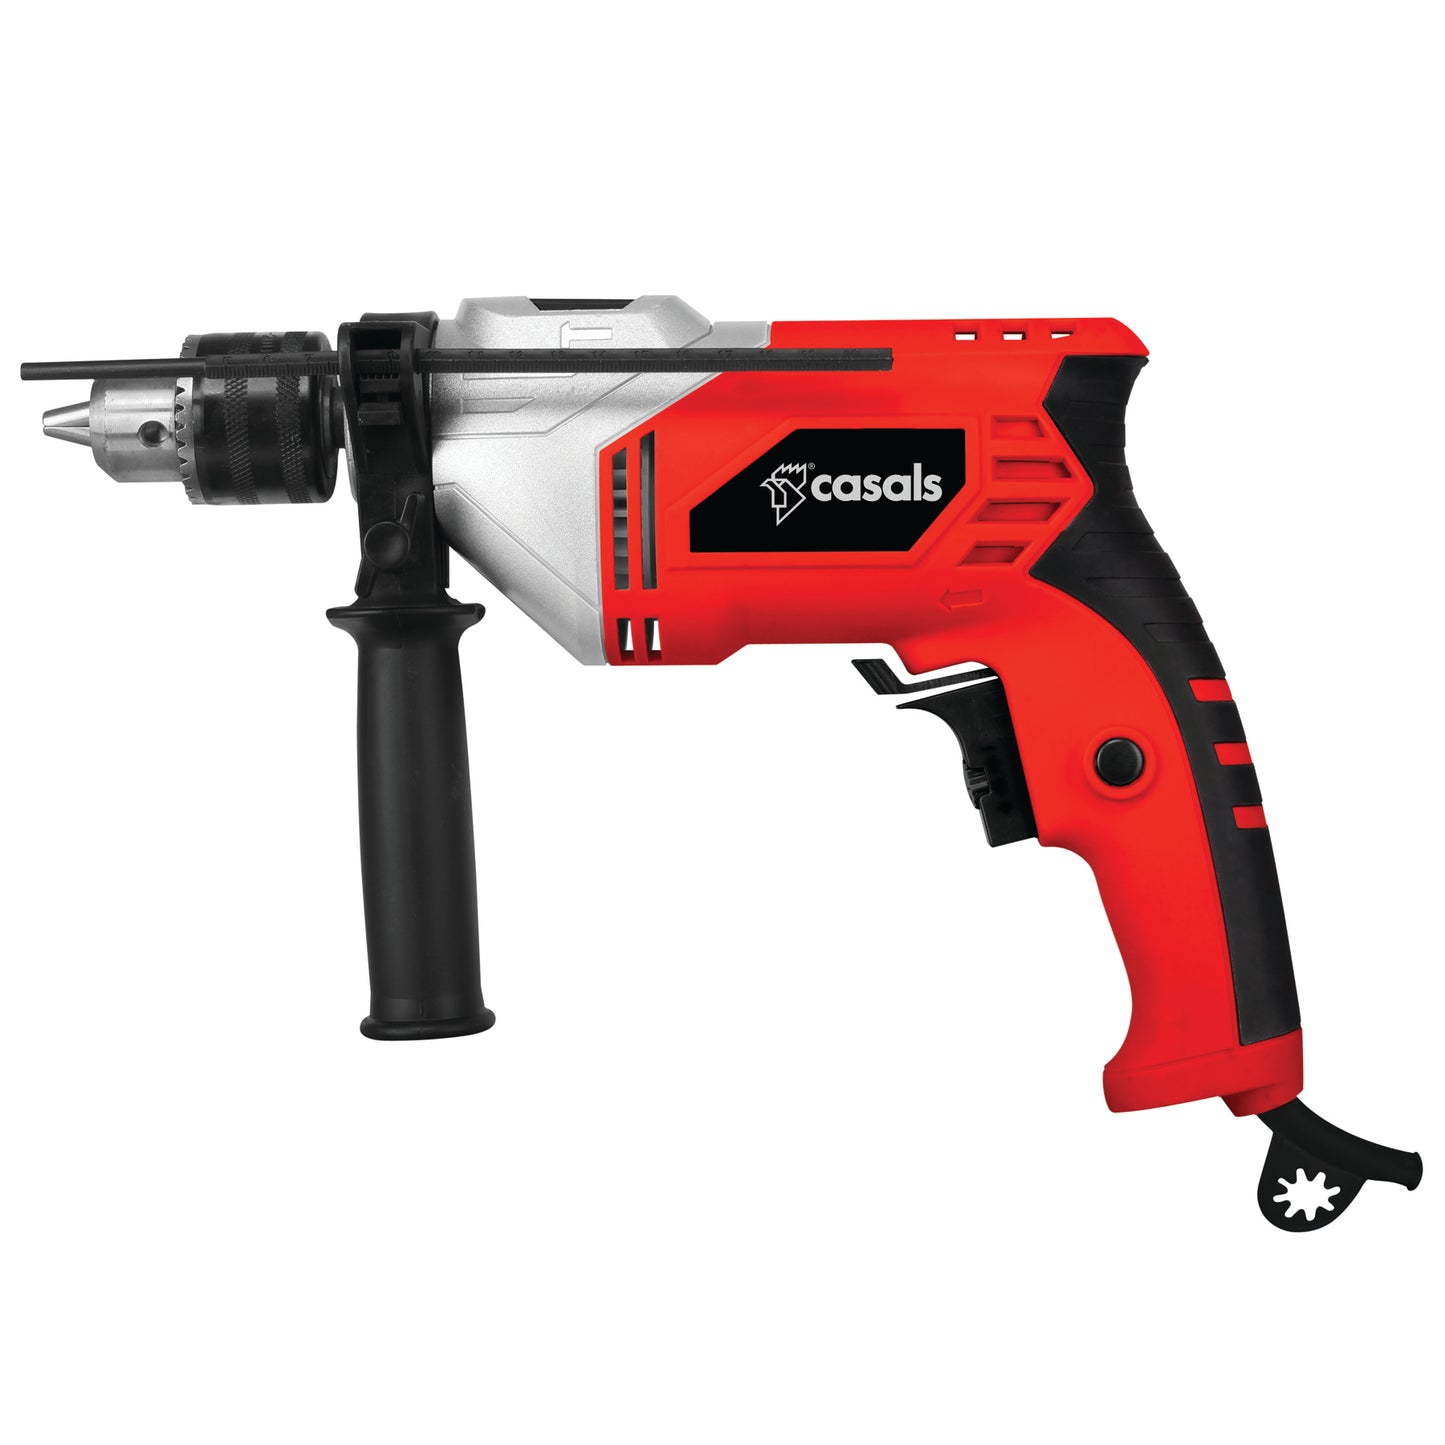 Casals Impact Drill 13mm Variable Speed 500W